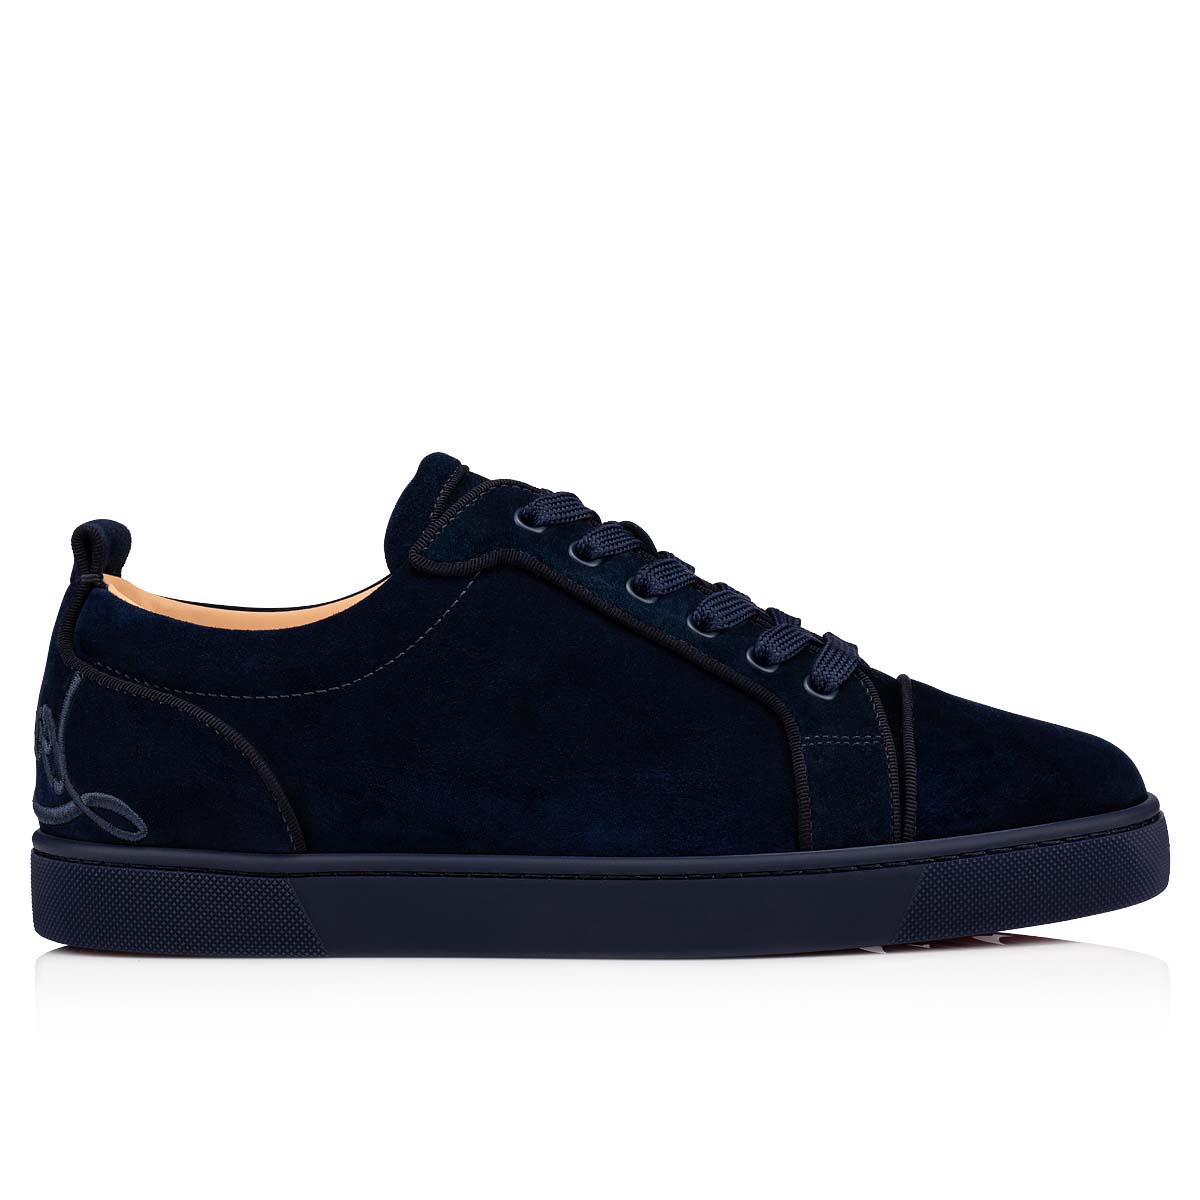 Christian Louboutin Louis Junior Studded Suede Trainers in Blue